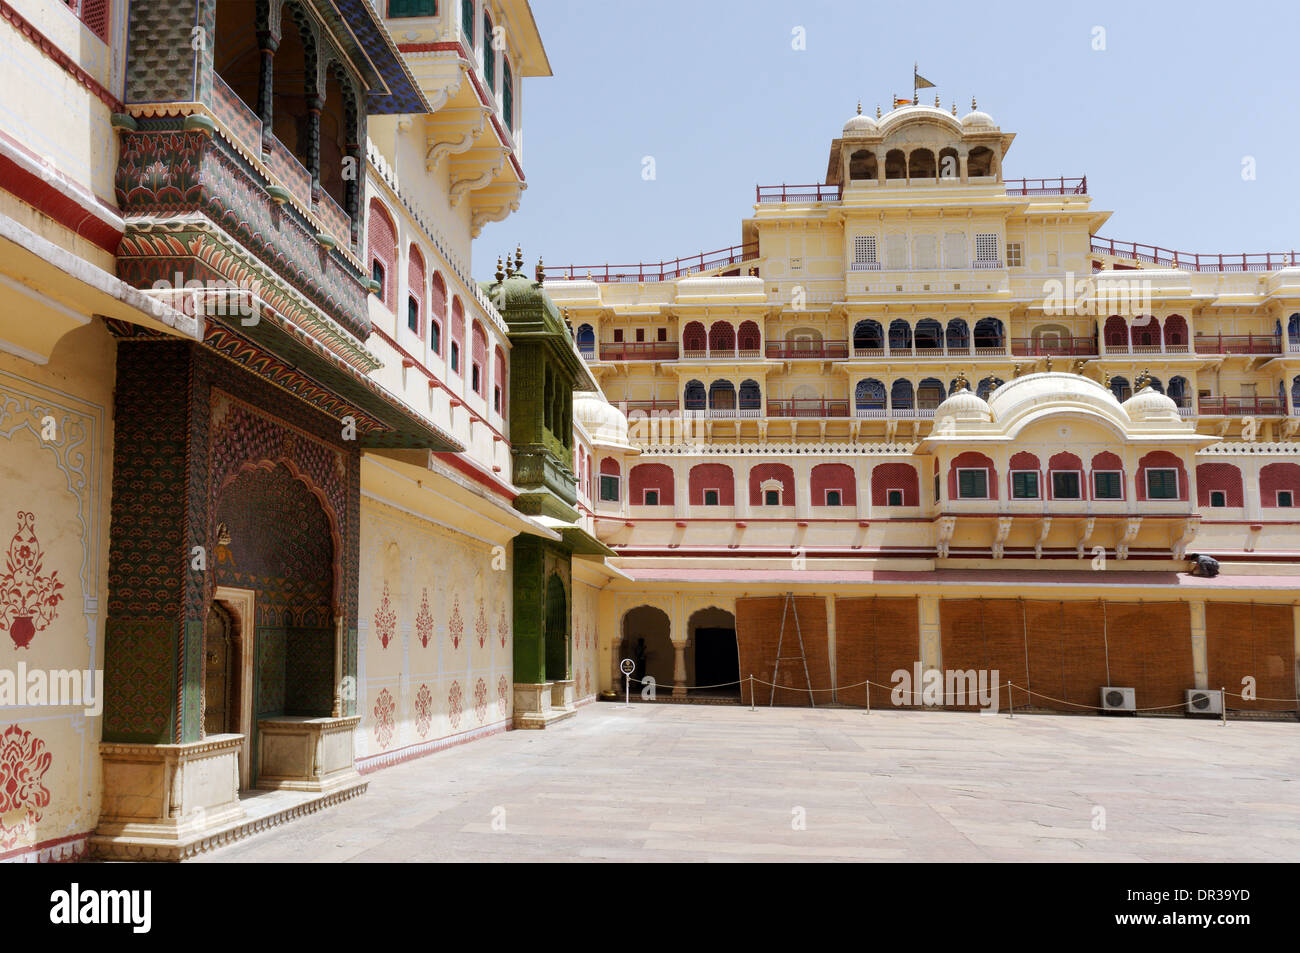 Chandra Mahal, one of the buildings in he Jaipur City Palace, Rajasthan, India Stock Photo